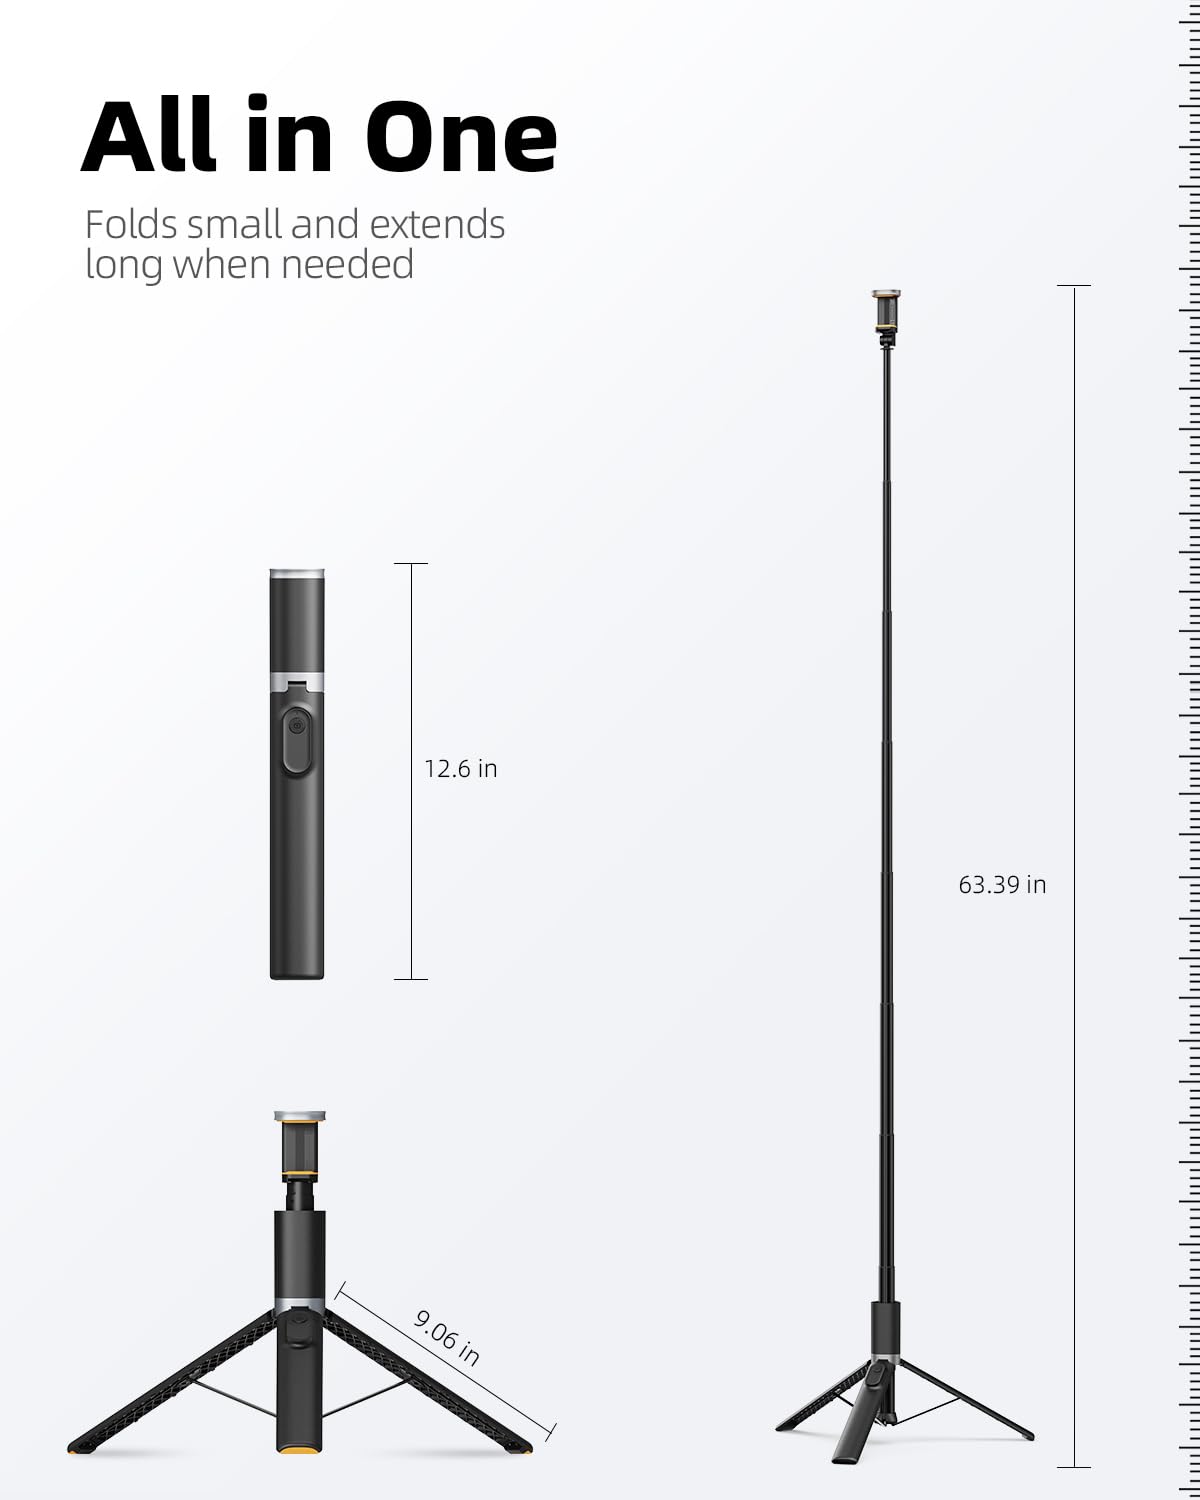 Phone Tripod, TODI 63" Portable Selfie Stick Tripod with Remote & iPhone Tripod Stand for Video Recording, Travel Tripod for iPhone, Cell Phone Tripod Compatible with iPhone 15/14/13 Pro Max/Android